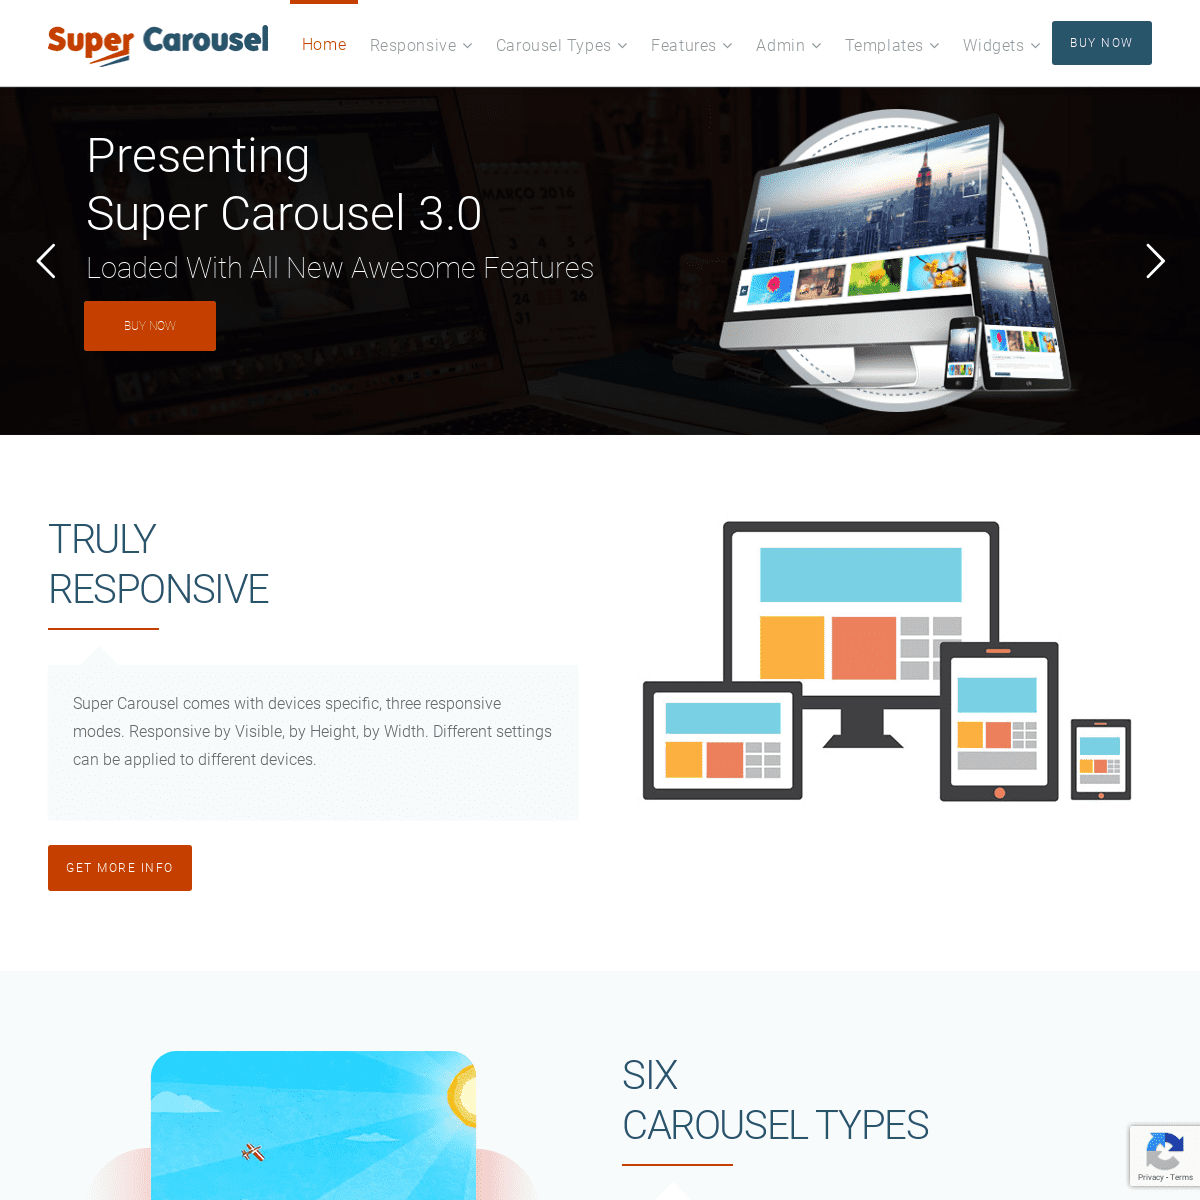 A complete backup of supercarousel.com